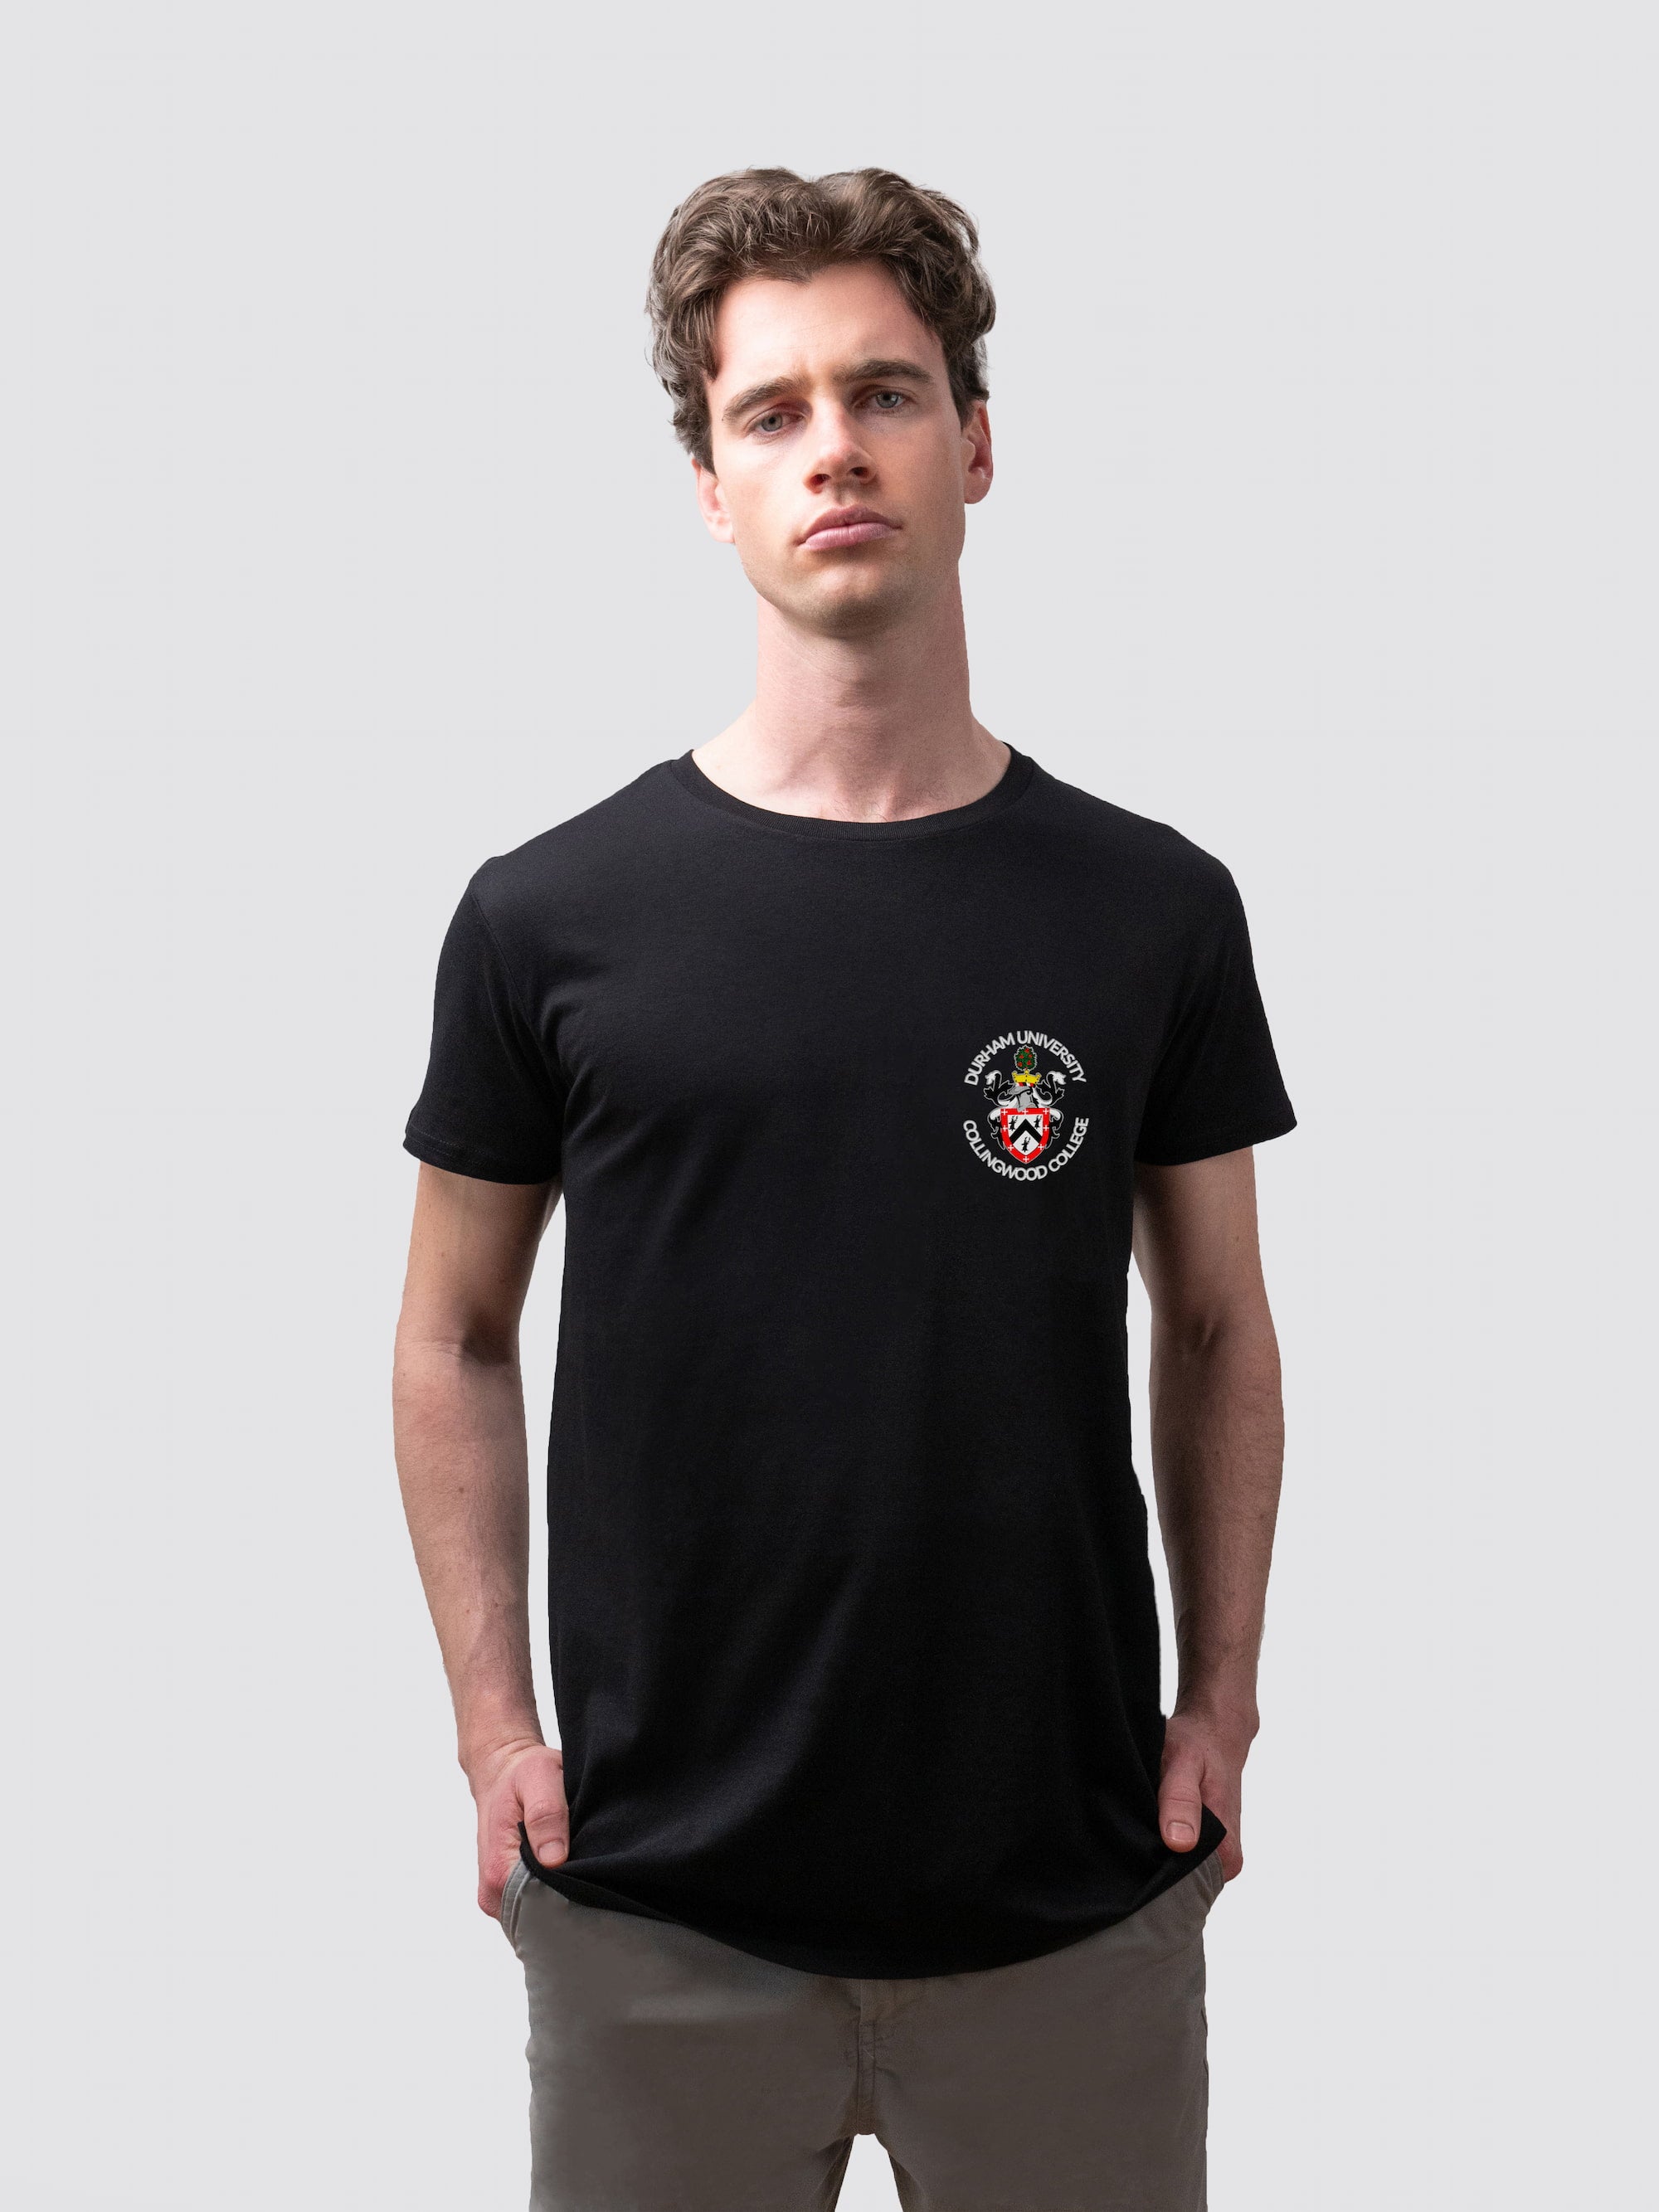 Sustainable Collingwood t-shirt, made from organic cotton